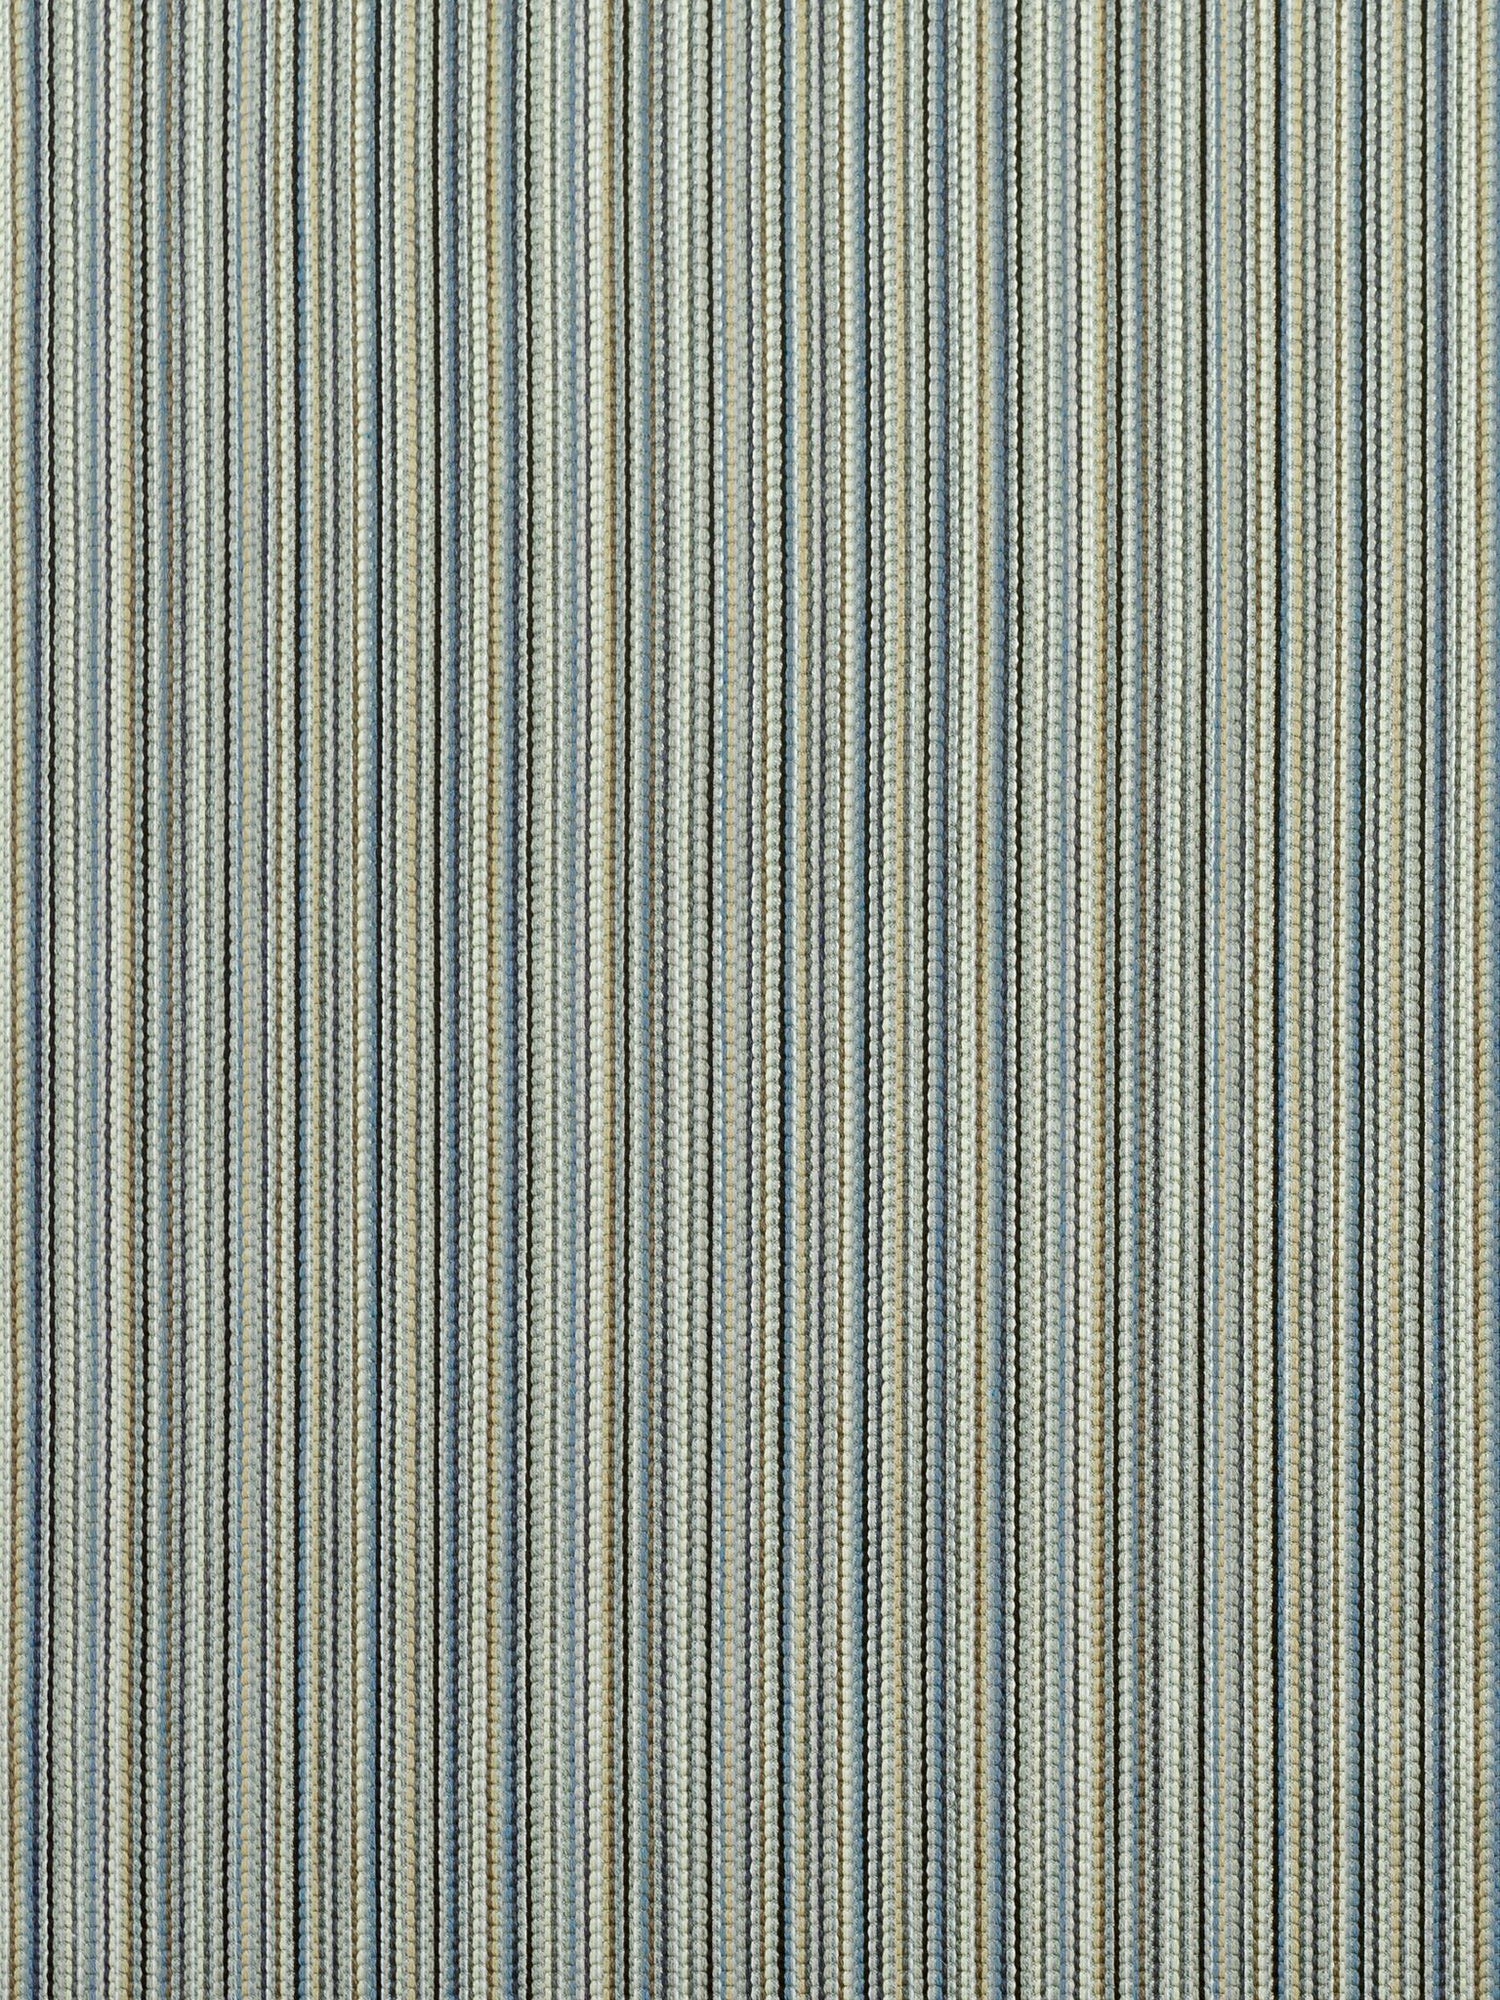 Alder Stripe fabric in moonstone color - pattern number GW 000127231 - by Scalamandre in the Grey Watkins collection